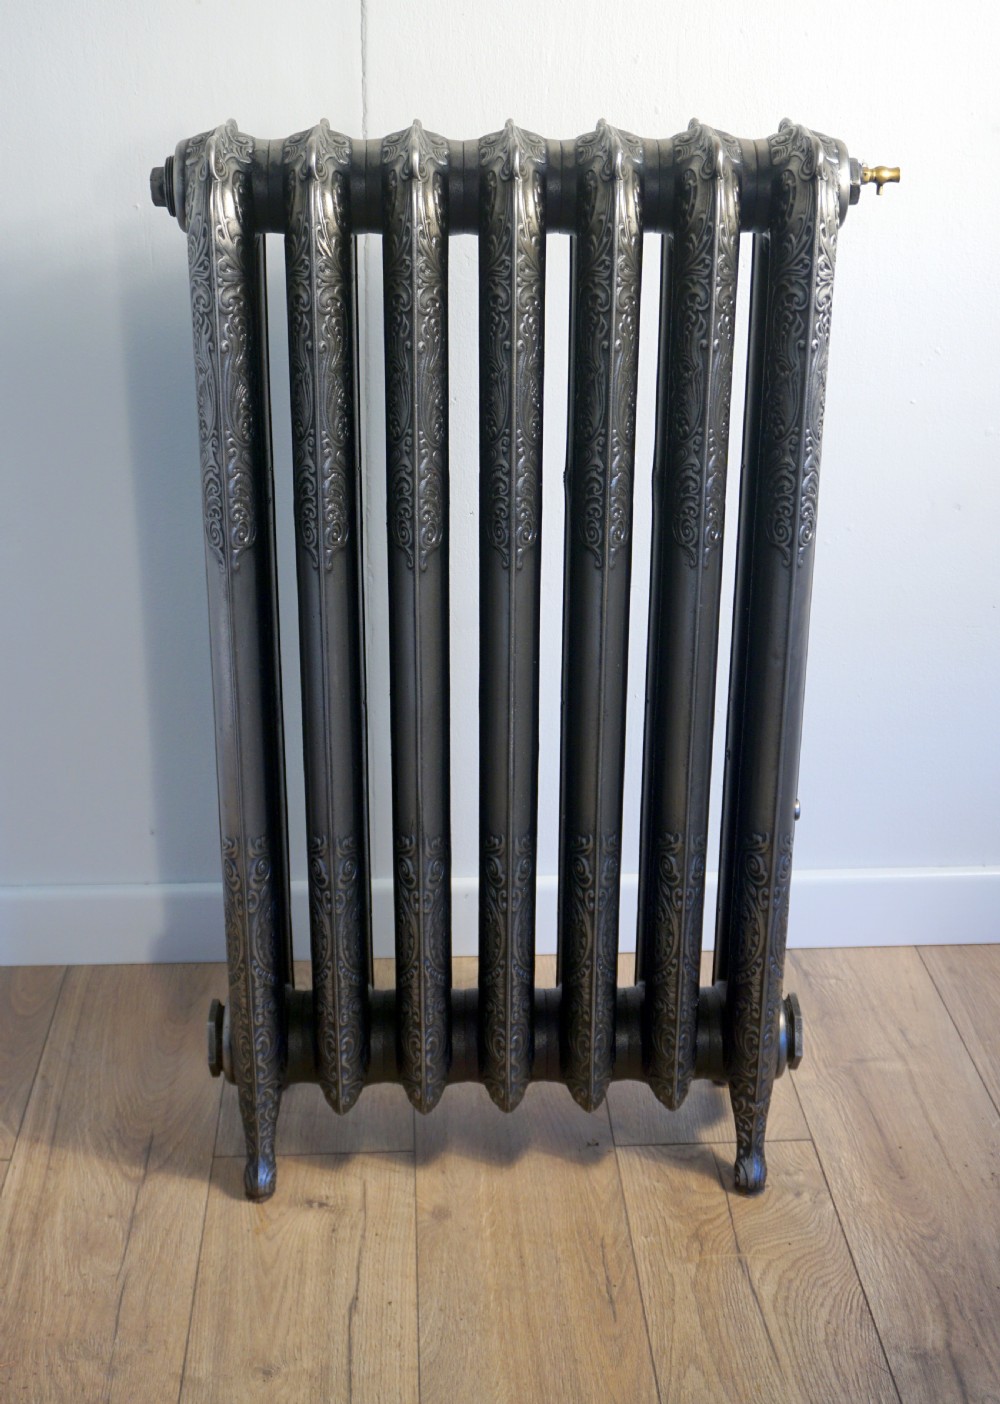 a lovely roccoco art nouveau 7 section 19th century polished cast iron radiator